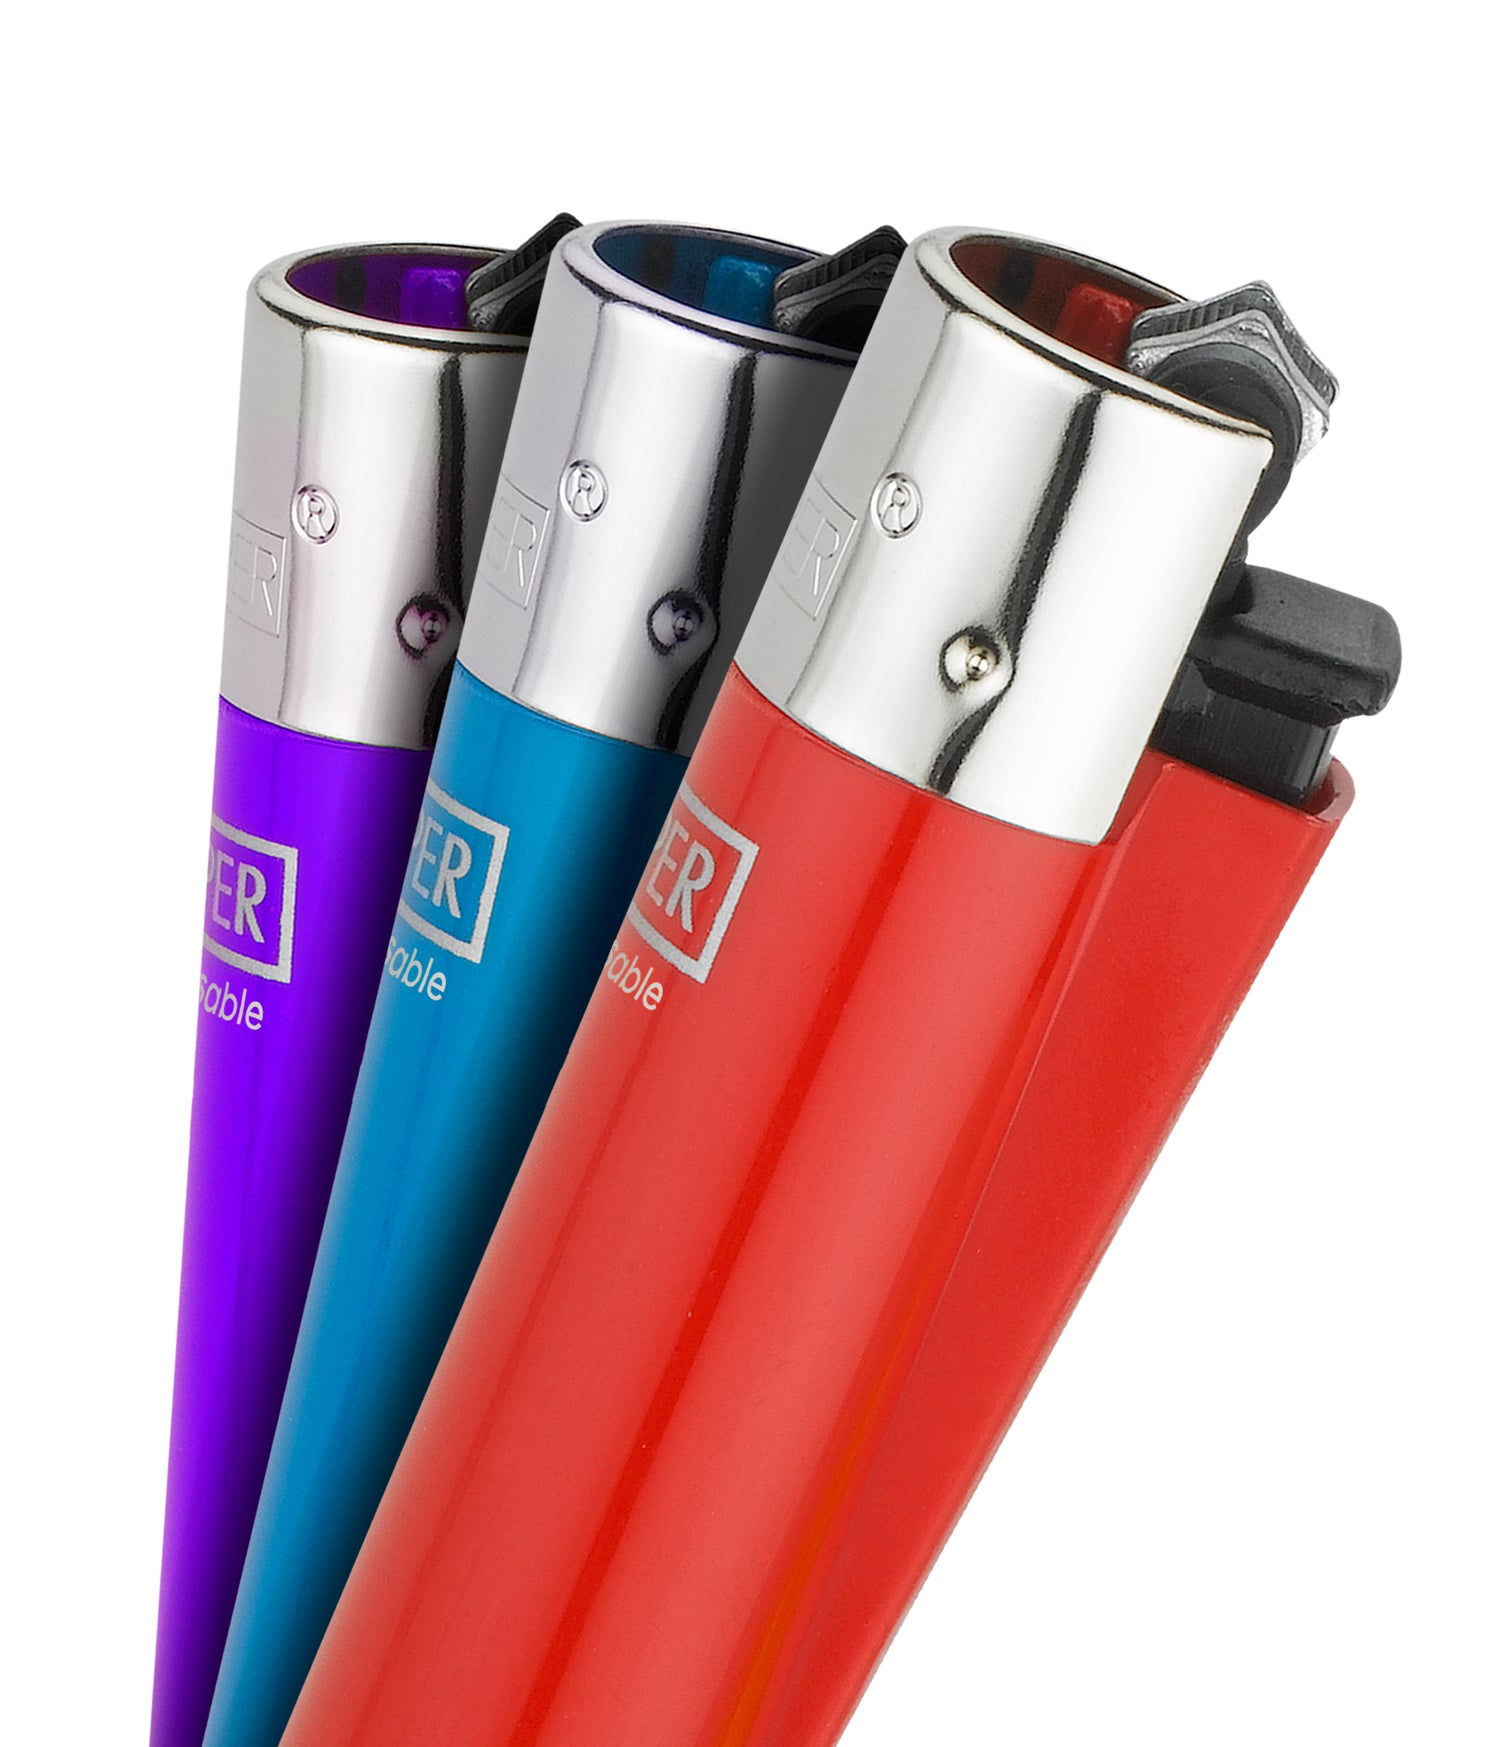 8 Clipper Reusable Lighters Assorted Solid Colors Refillable Reflintable  Regular Size - 1 Clear, 1 White, 1 Yellow, 1 Orange, 1 Red, 1 Green, 1  Blue